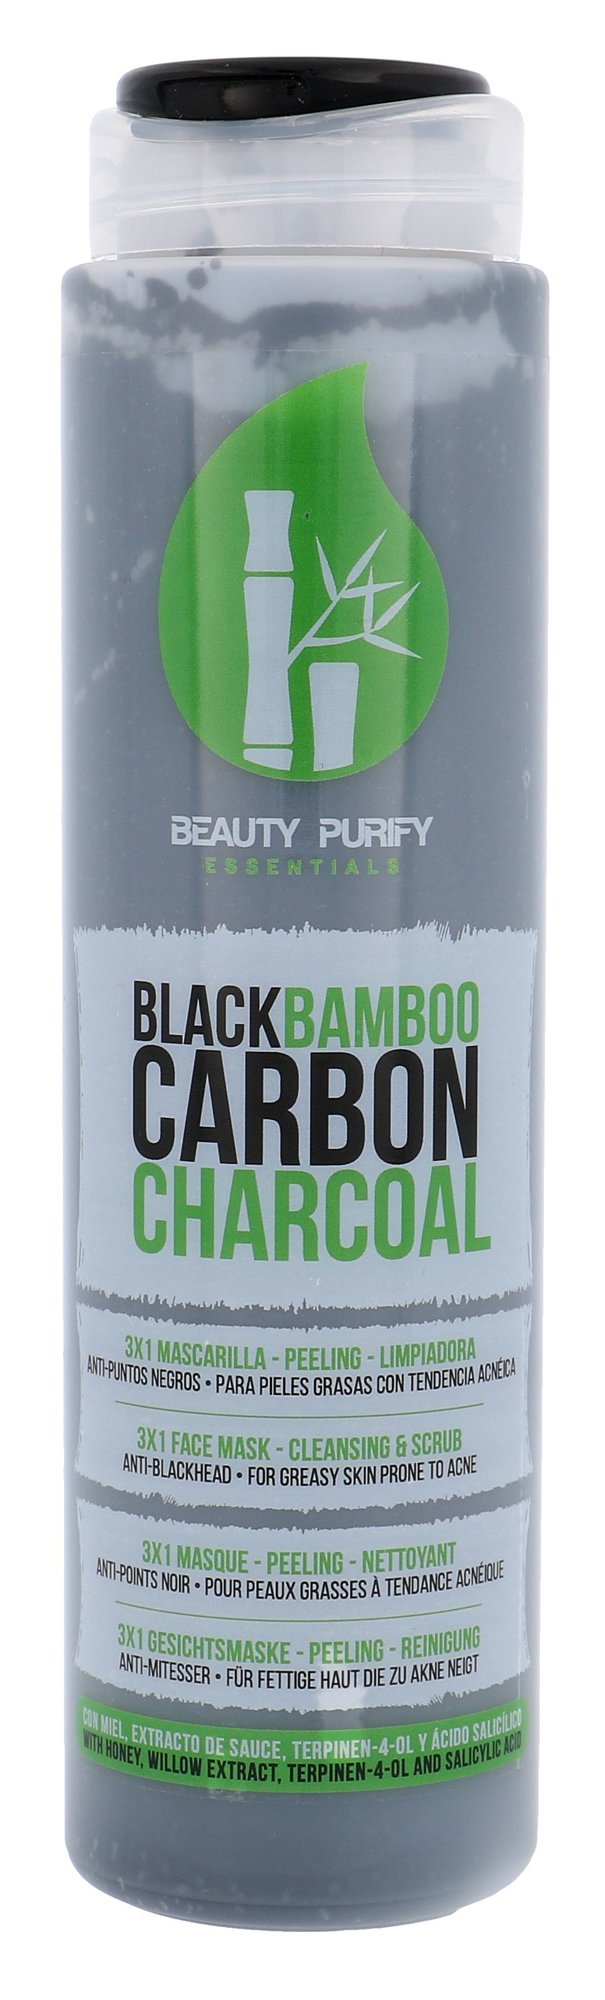 Diet Esthetic Black Bamboo Carbon Charcoal Face Mask 3in1